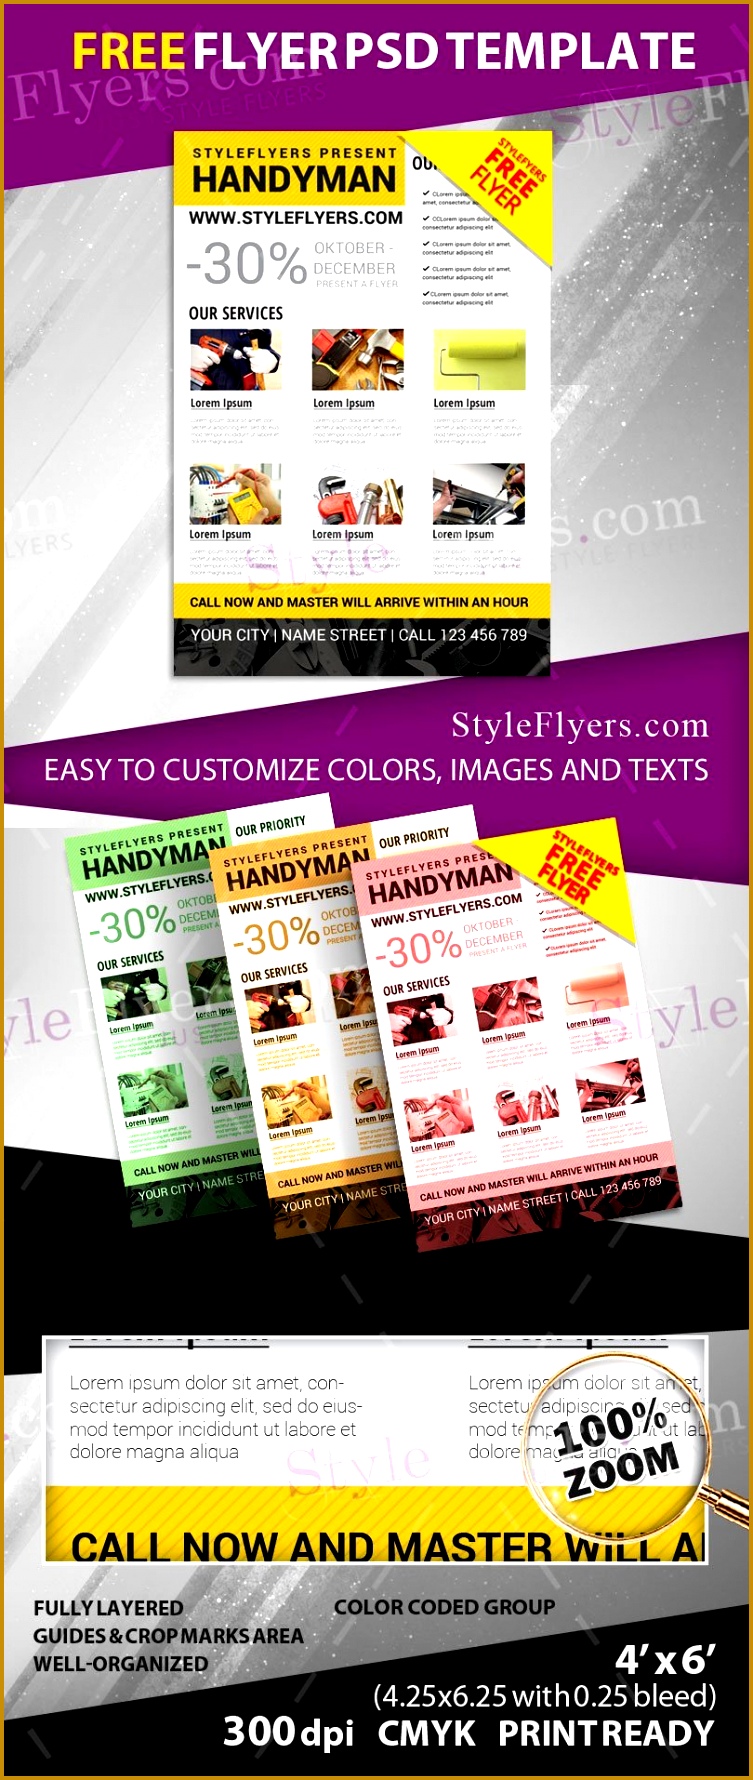 Start using a reliable help We can offer our assistance in promoting your services Download for free our new handyman PSD flyer template 1780753